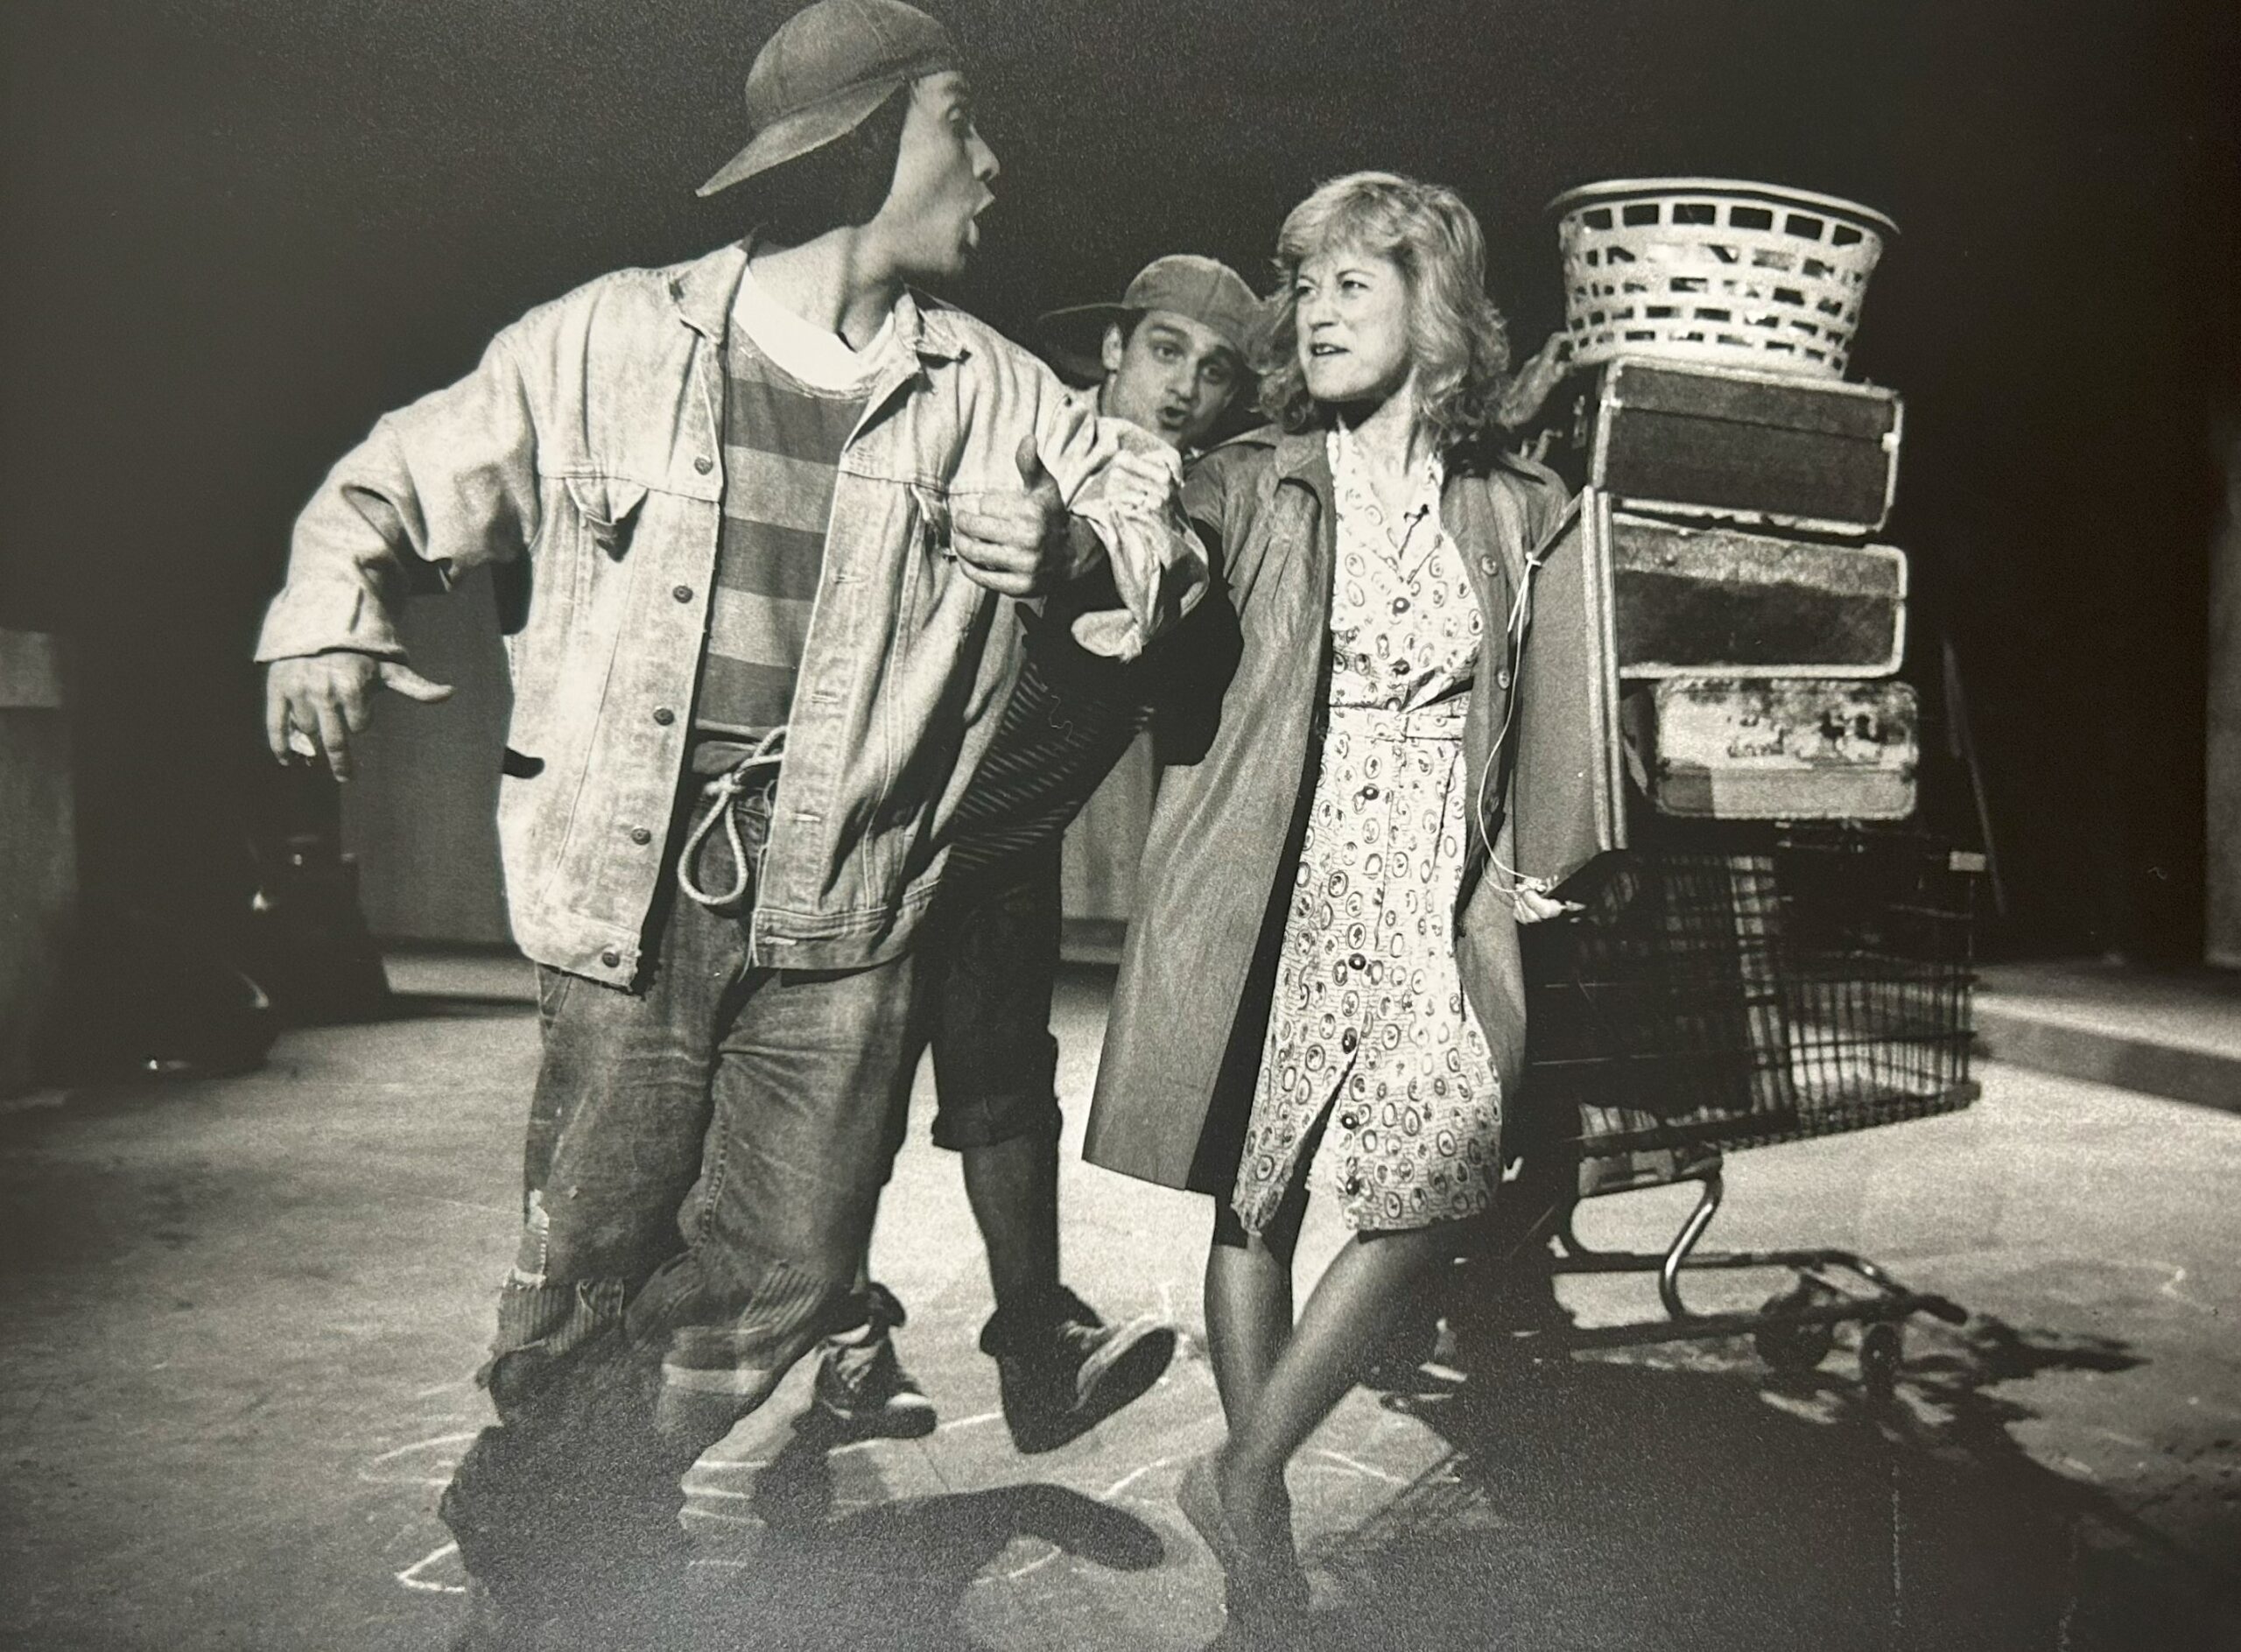 A black-and-white photograph depicting three performers in the 1988 Dream in High Park production of Blood Brothers. The two men wear baseball caps, jeans and jackets while the woman sports a patterned dress and cardigan.